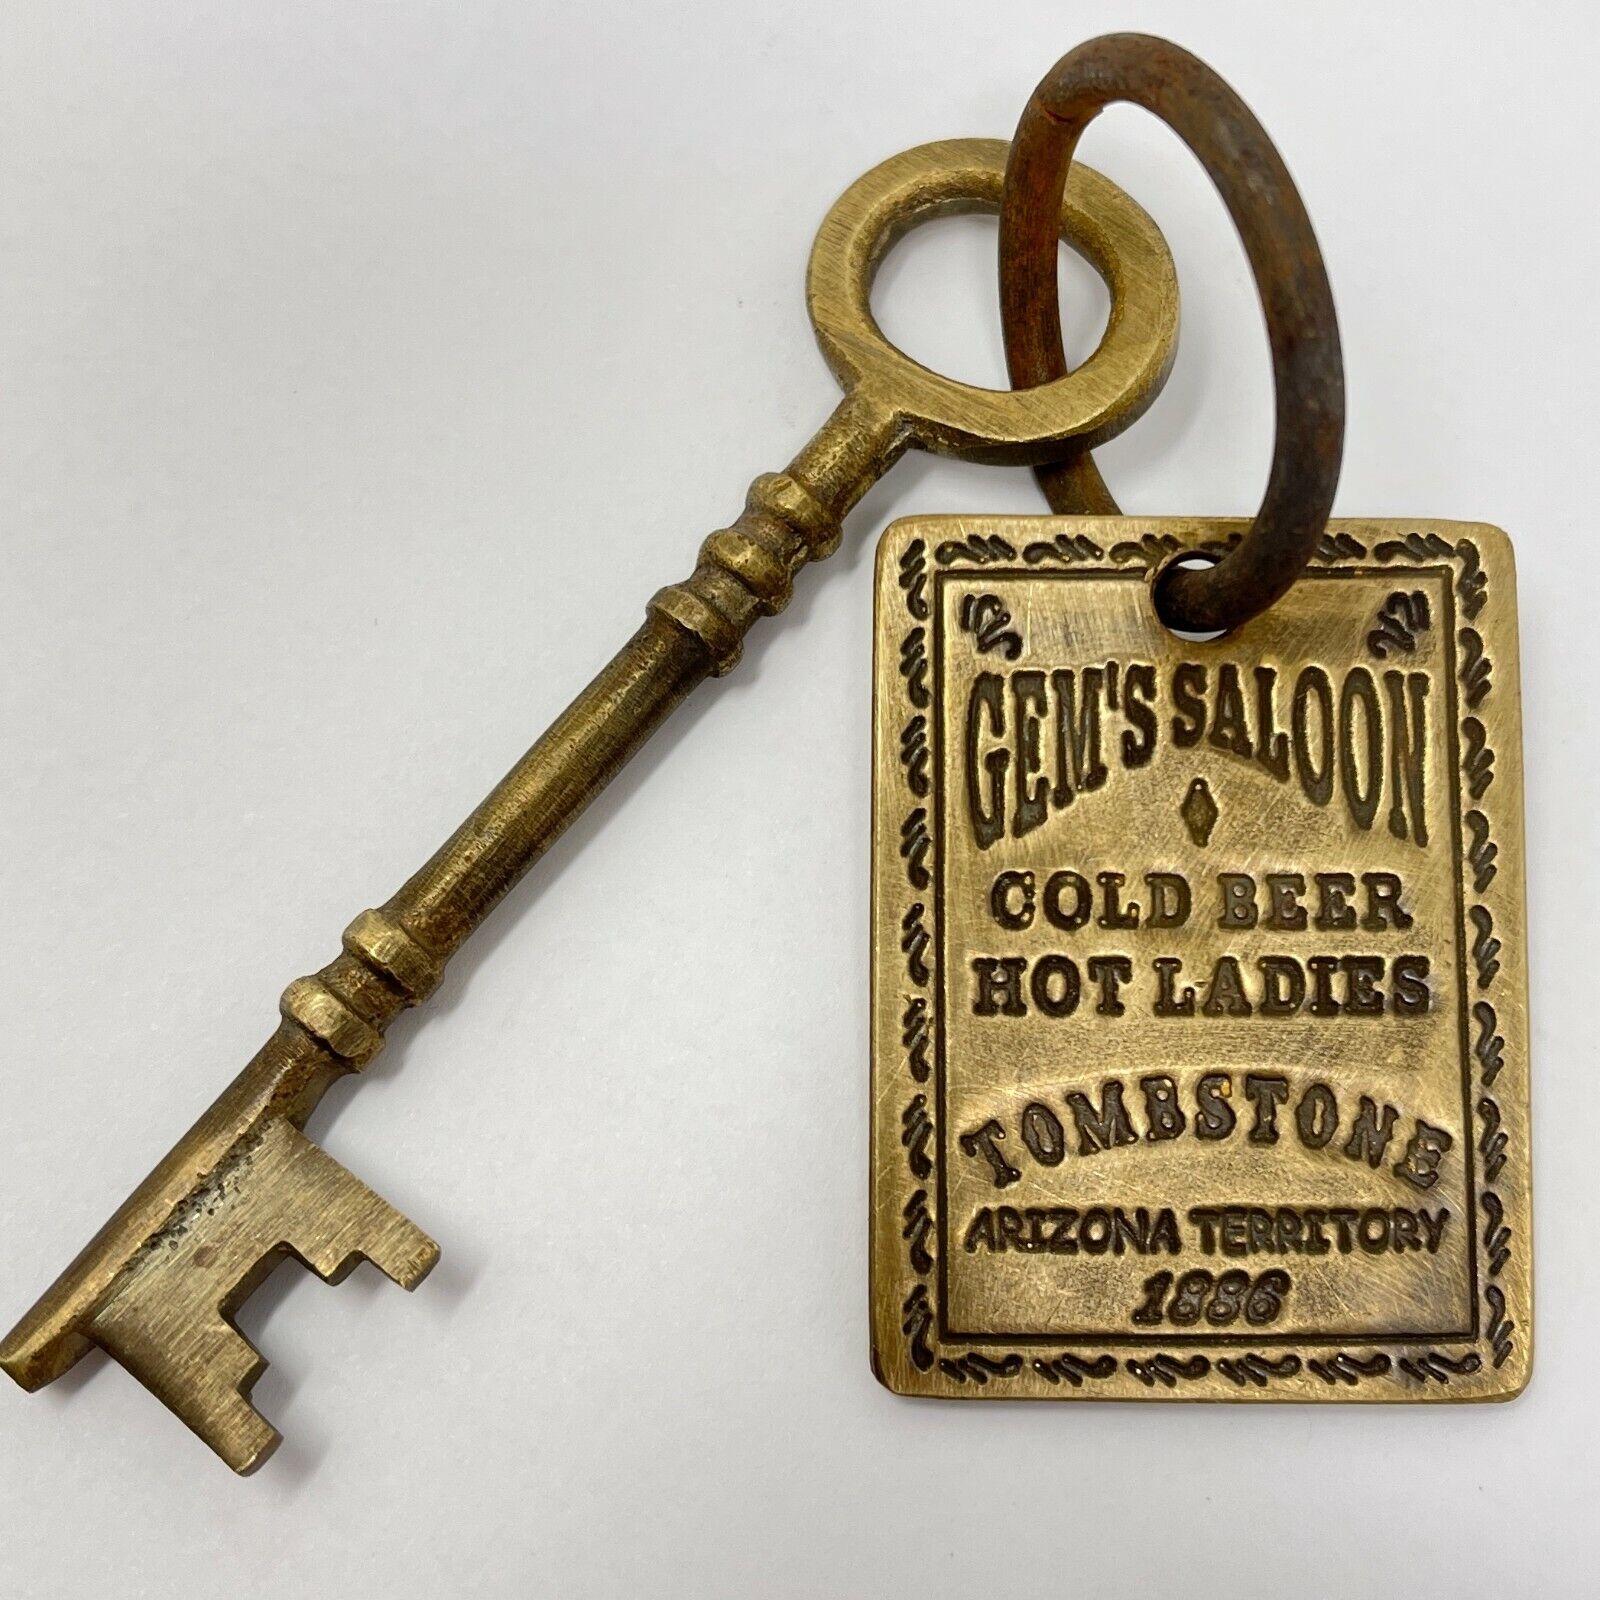 Gem's Saloon 1886 Tombstone Brothel Room Solid Brass Tag & Key W/ Antique Finish